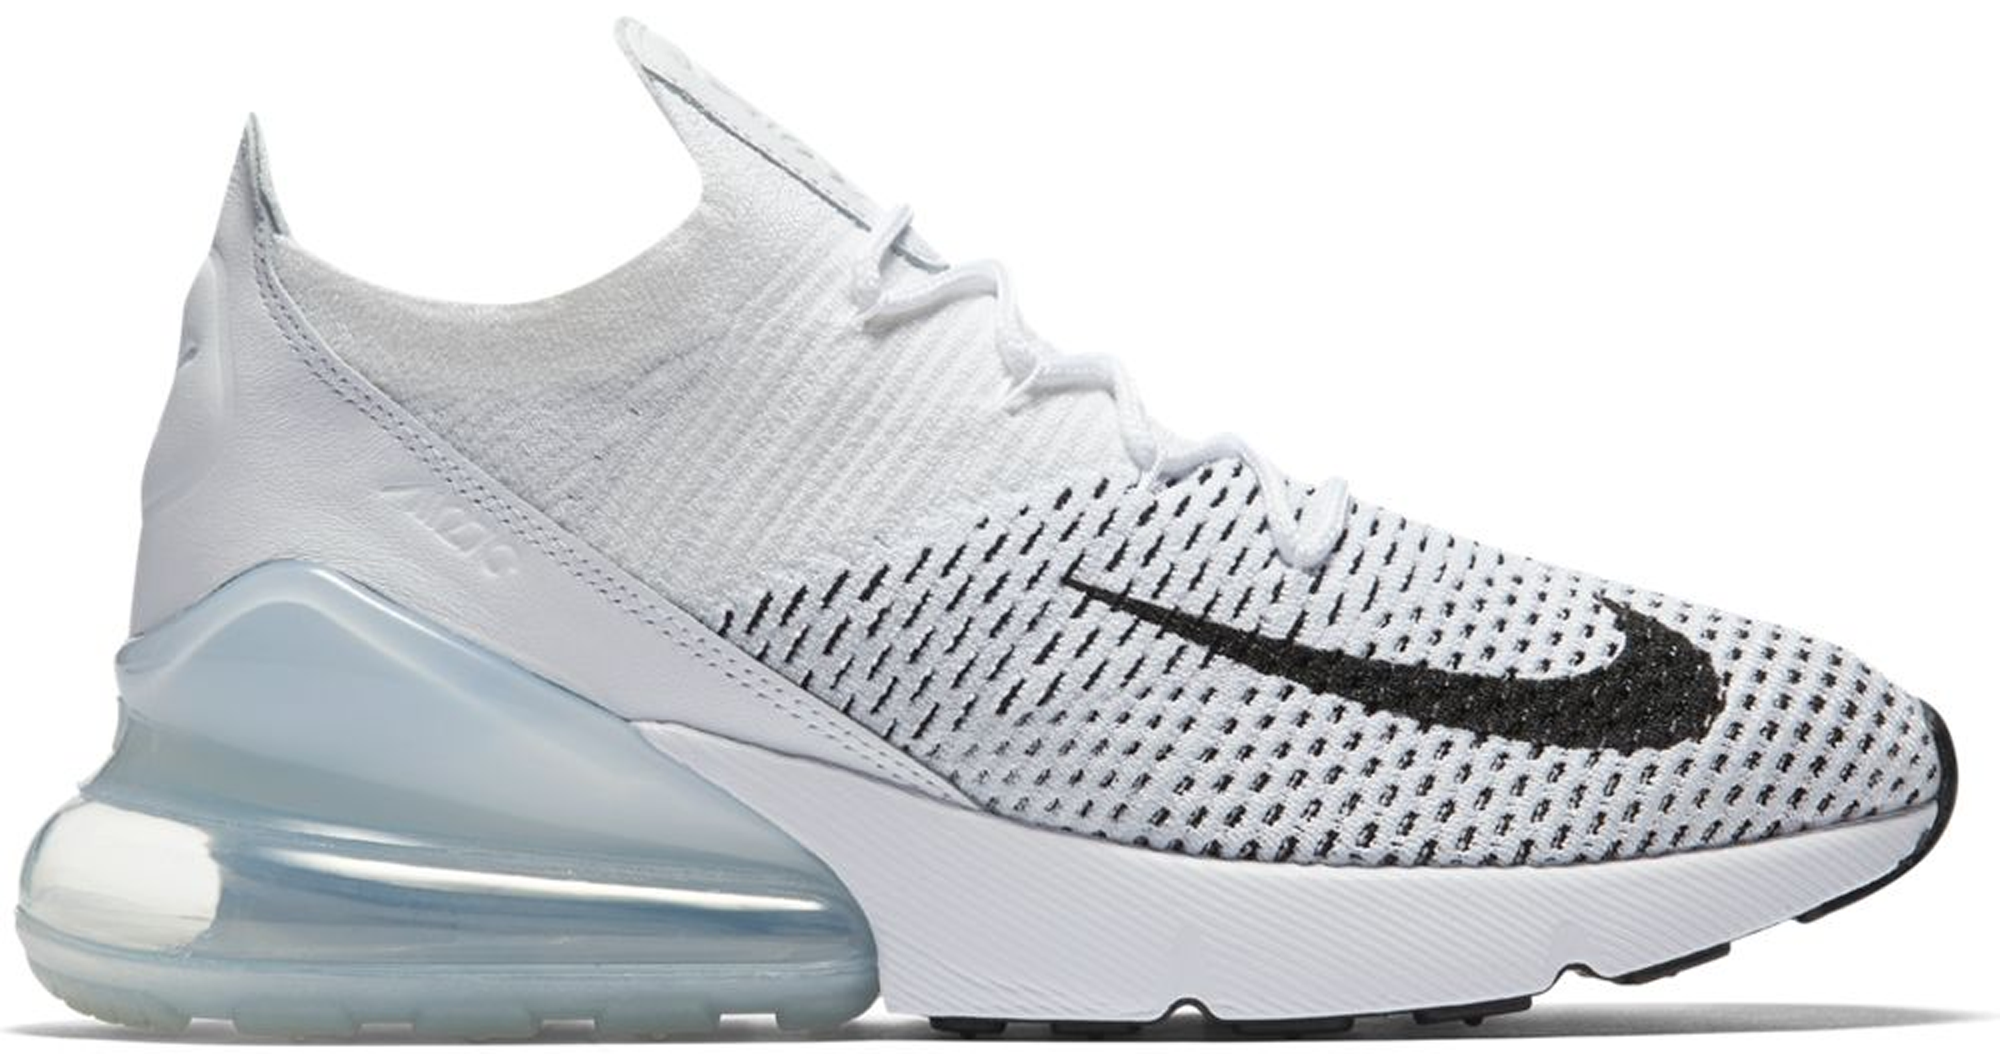 nike air max 270 flyknit trainer black / white